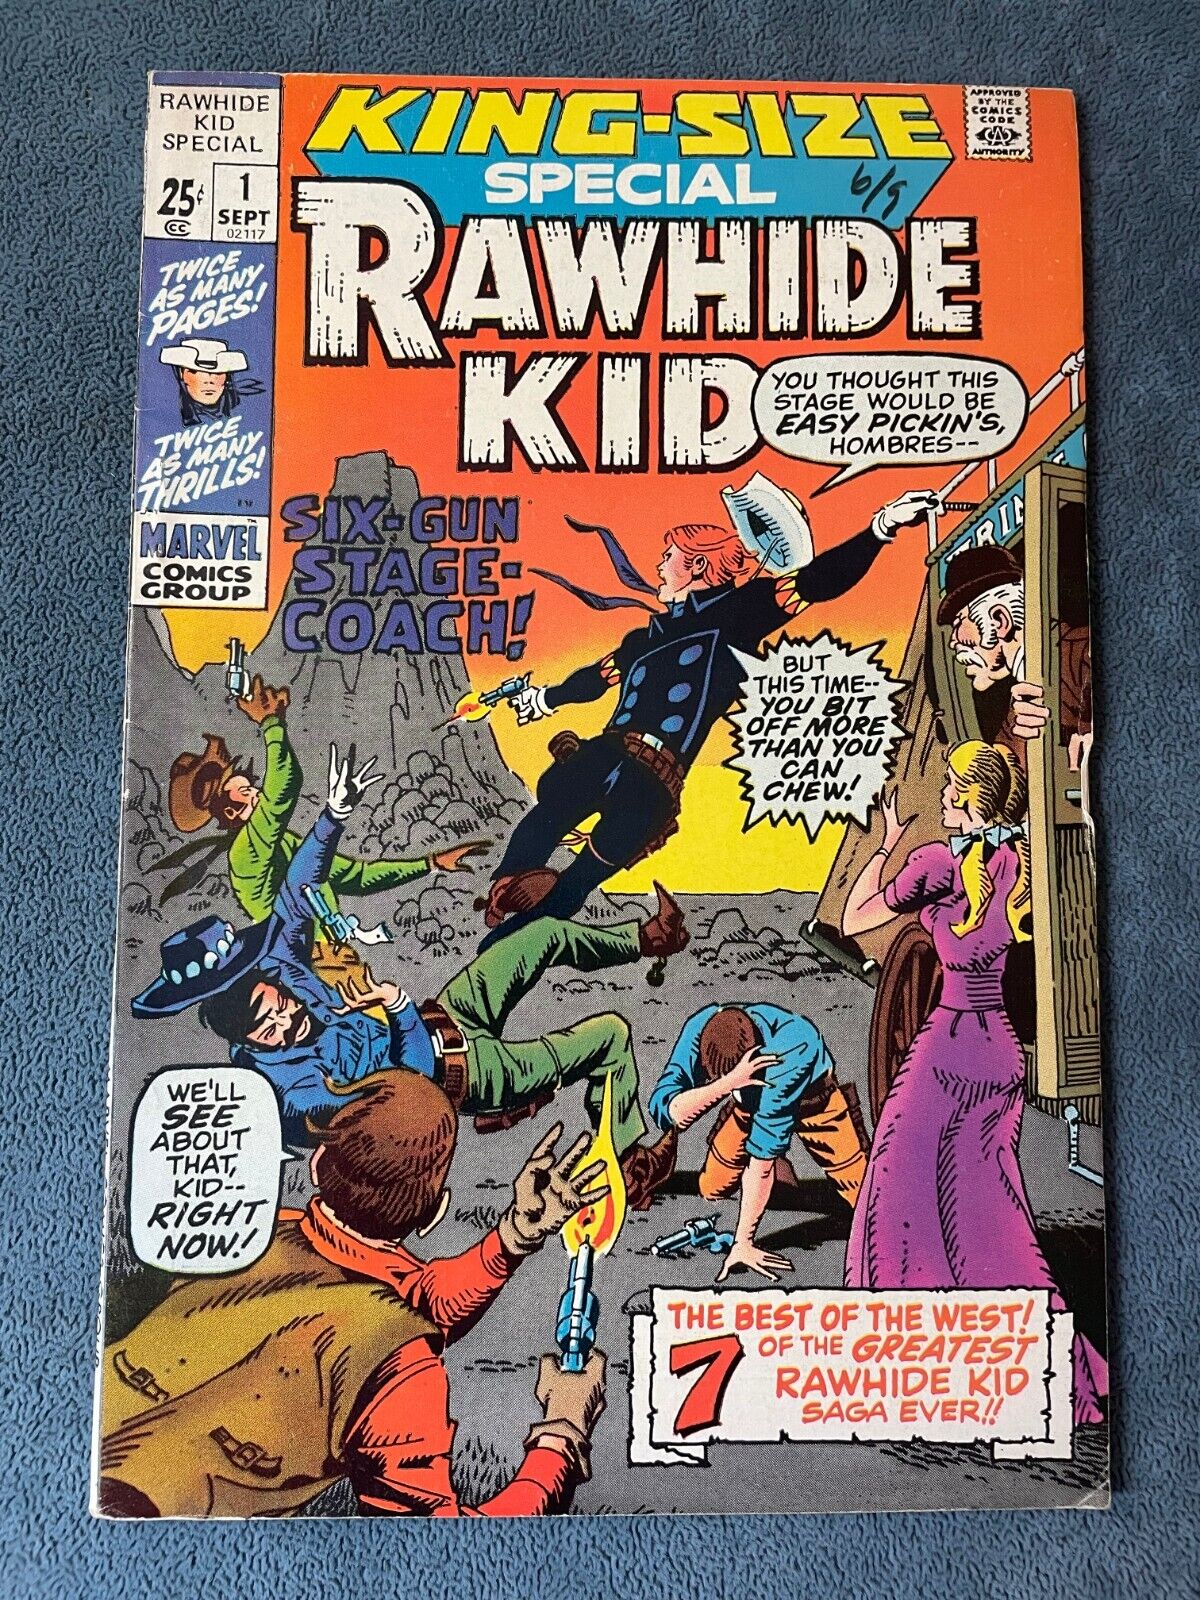 Rawhide Kid Annual #1 King Size Special 1971 Marvel Comic Book Western FN